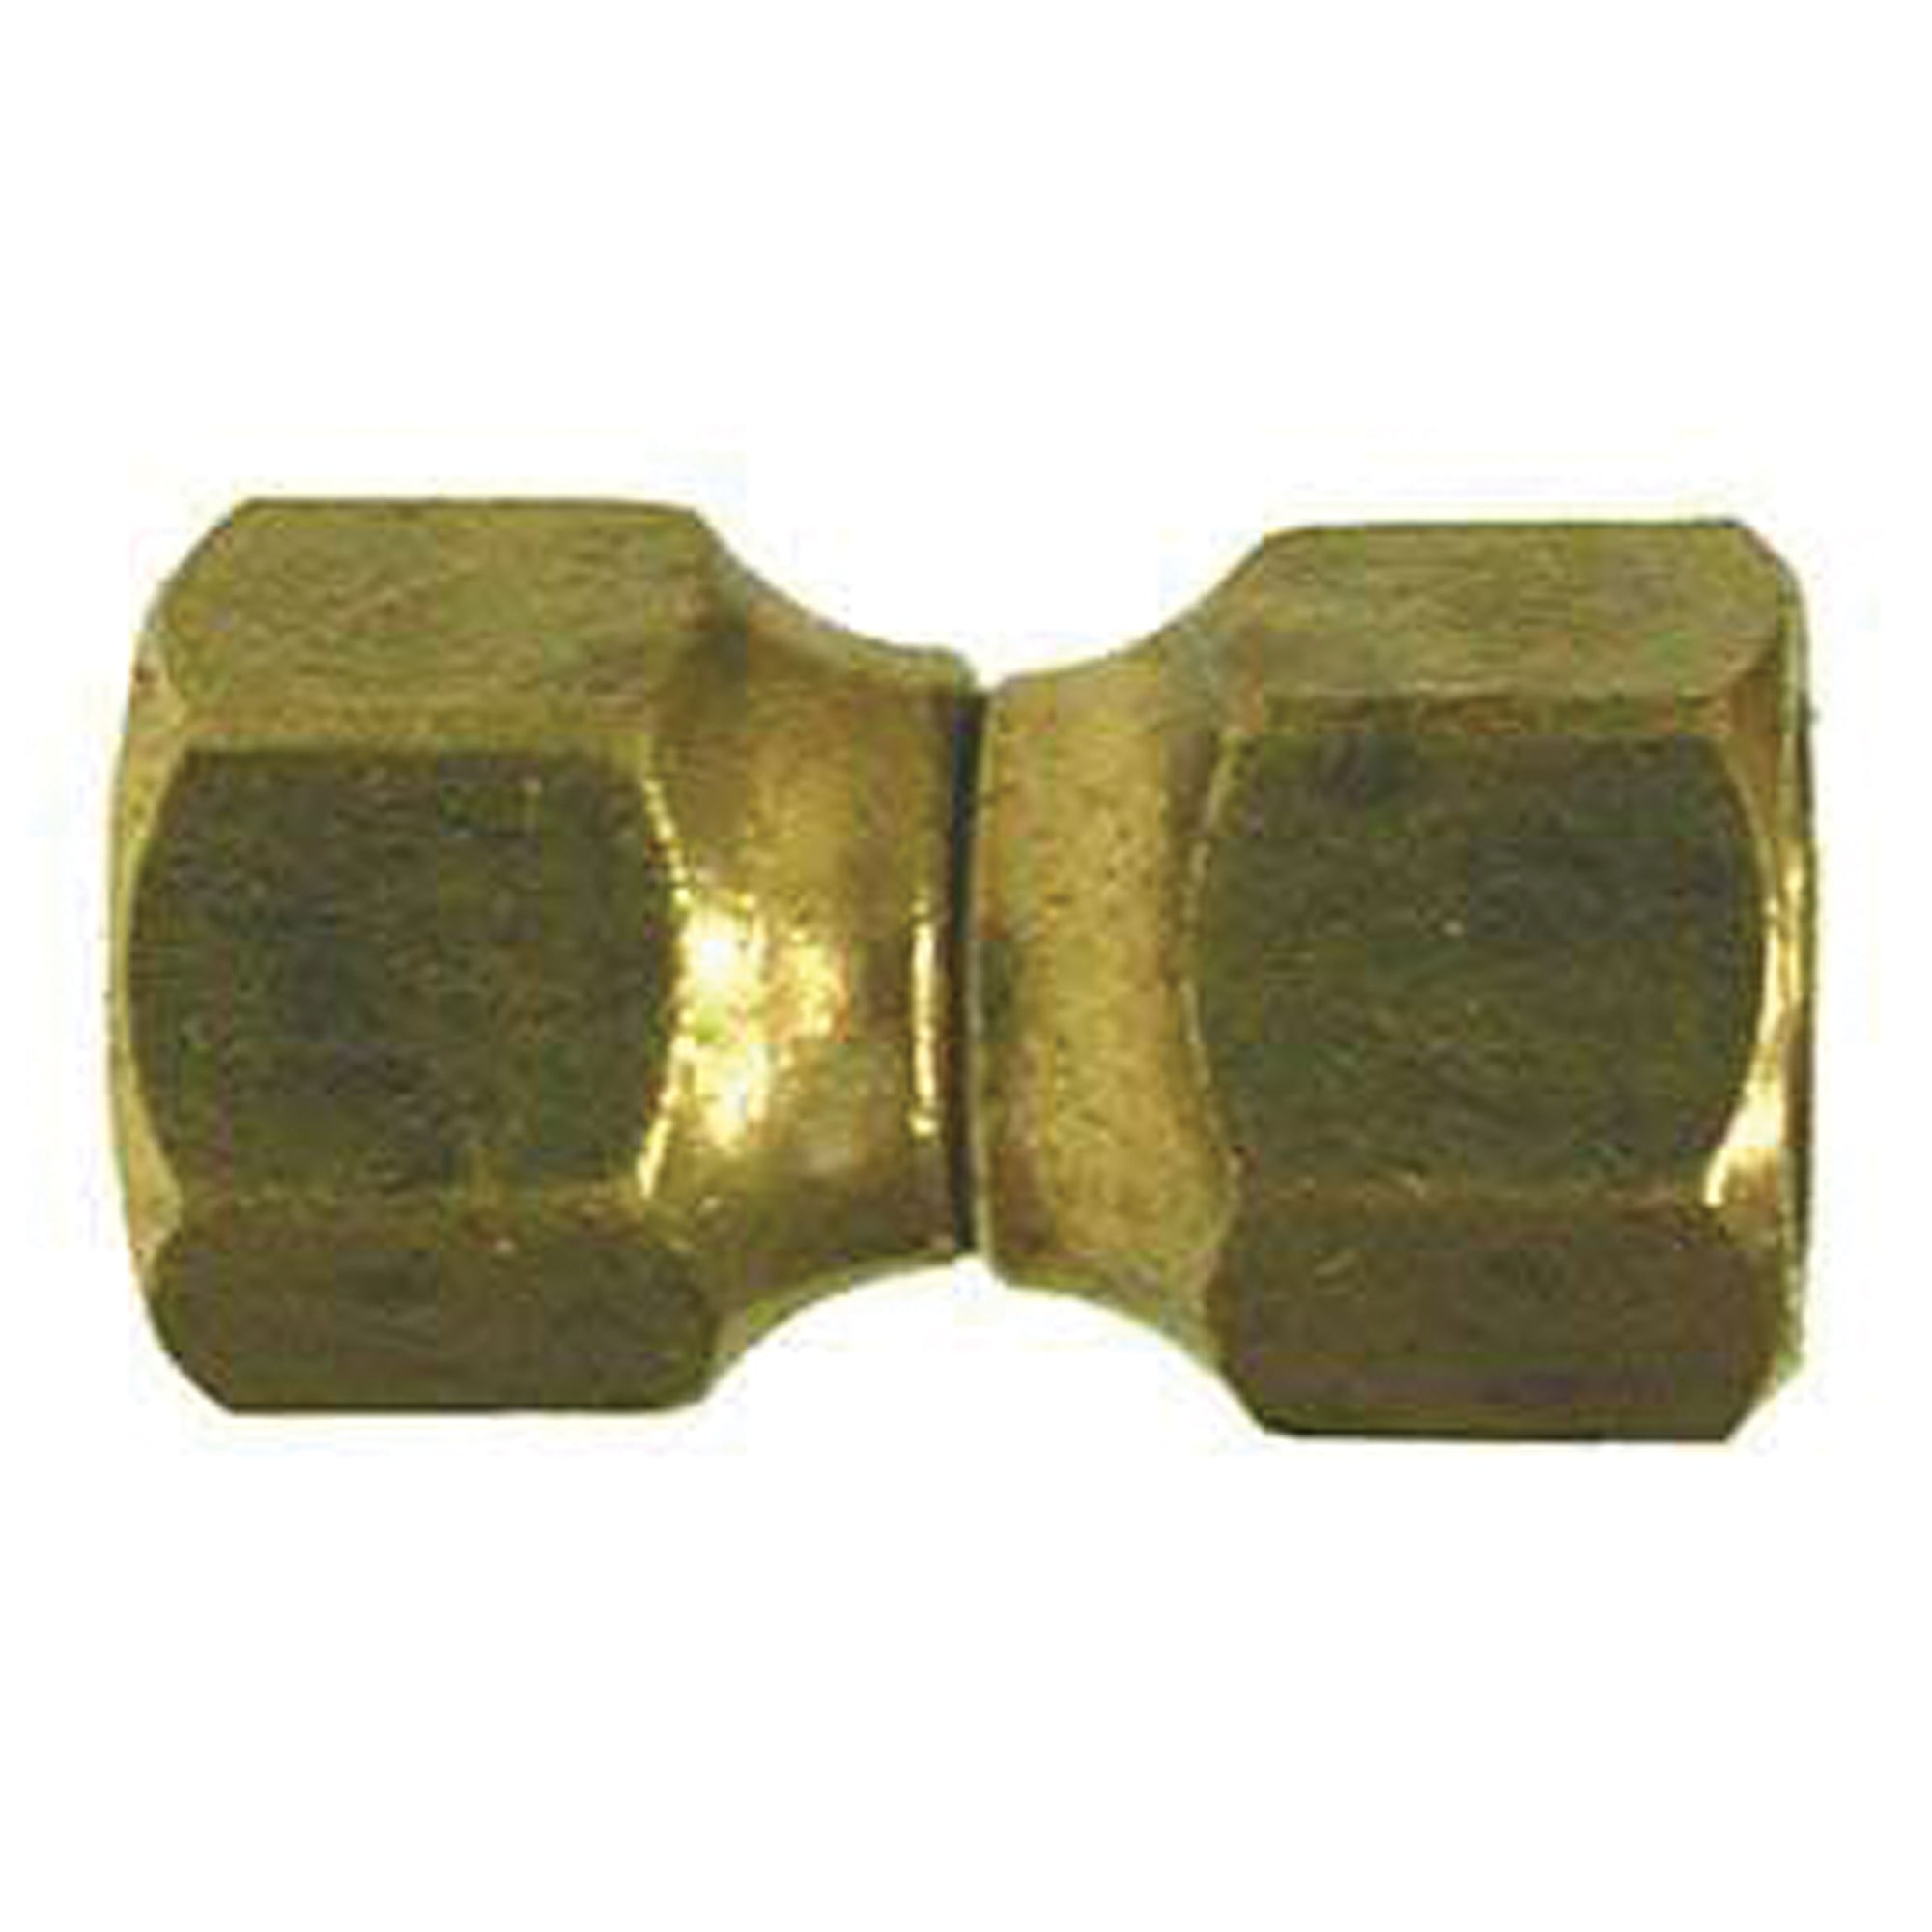 Midland Metal 10-483 SAE 45 Degree Flare Forged Swivel Nut - 3/8 in., Each